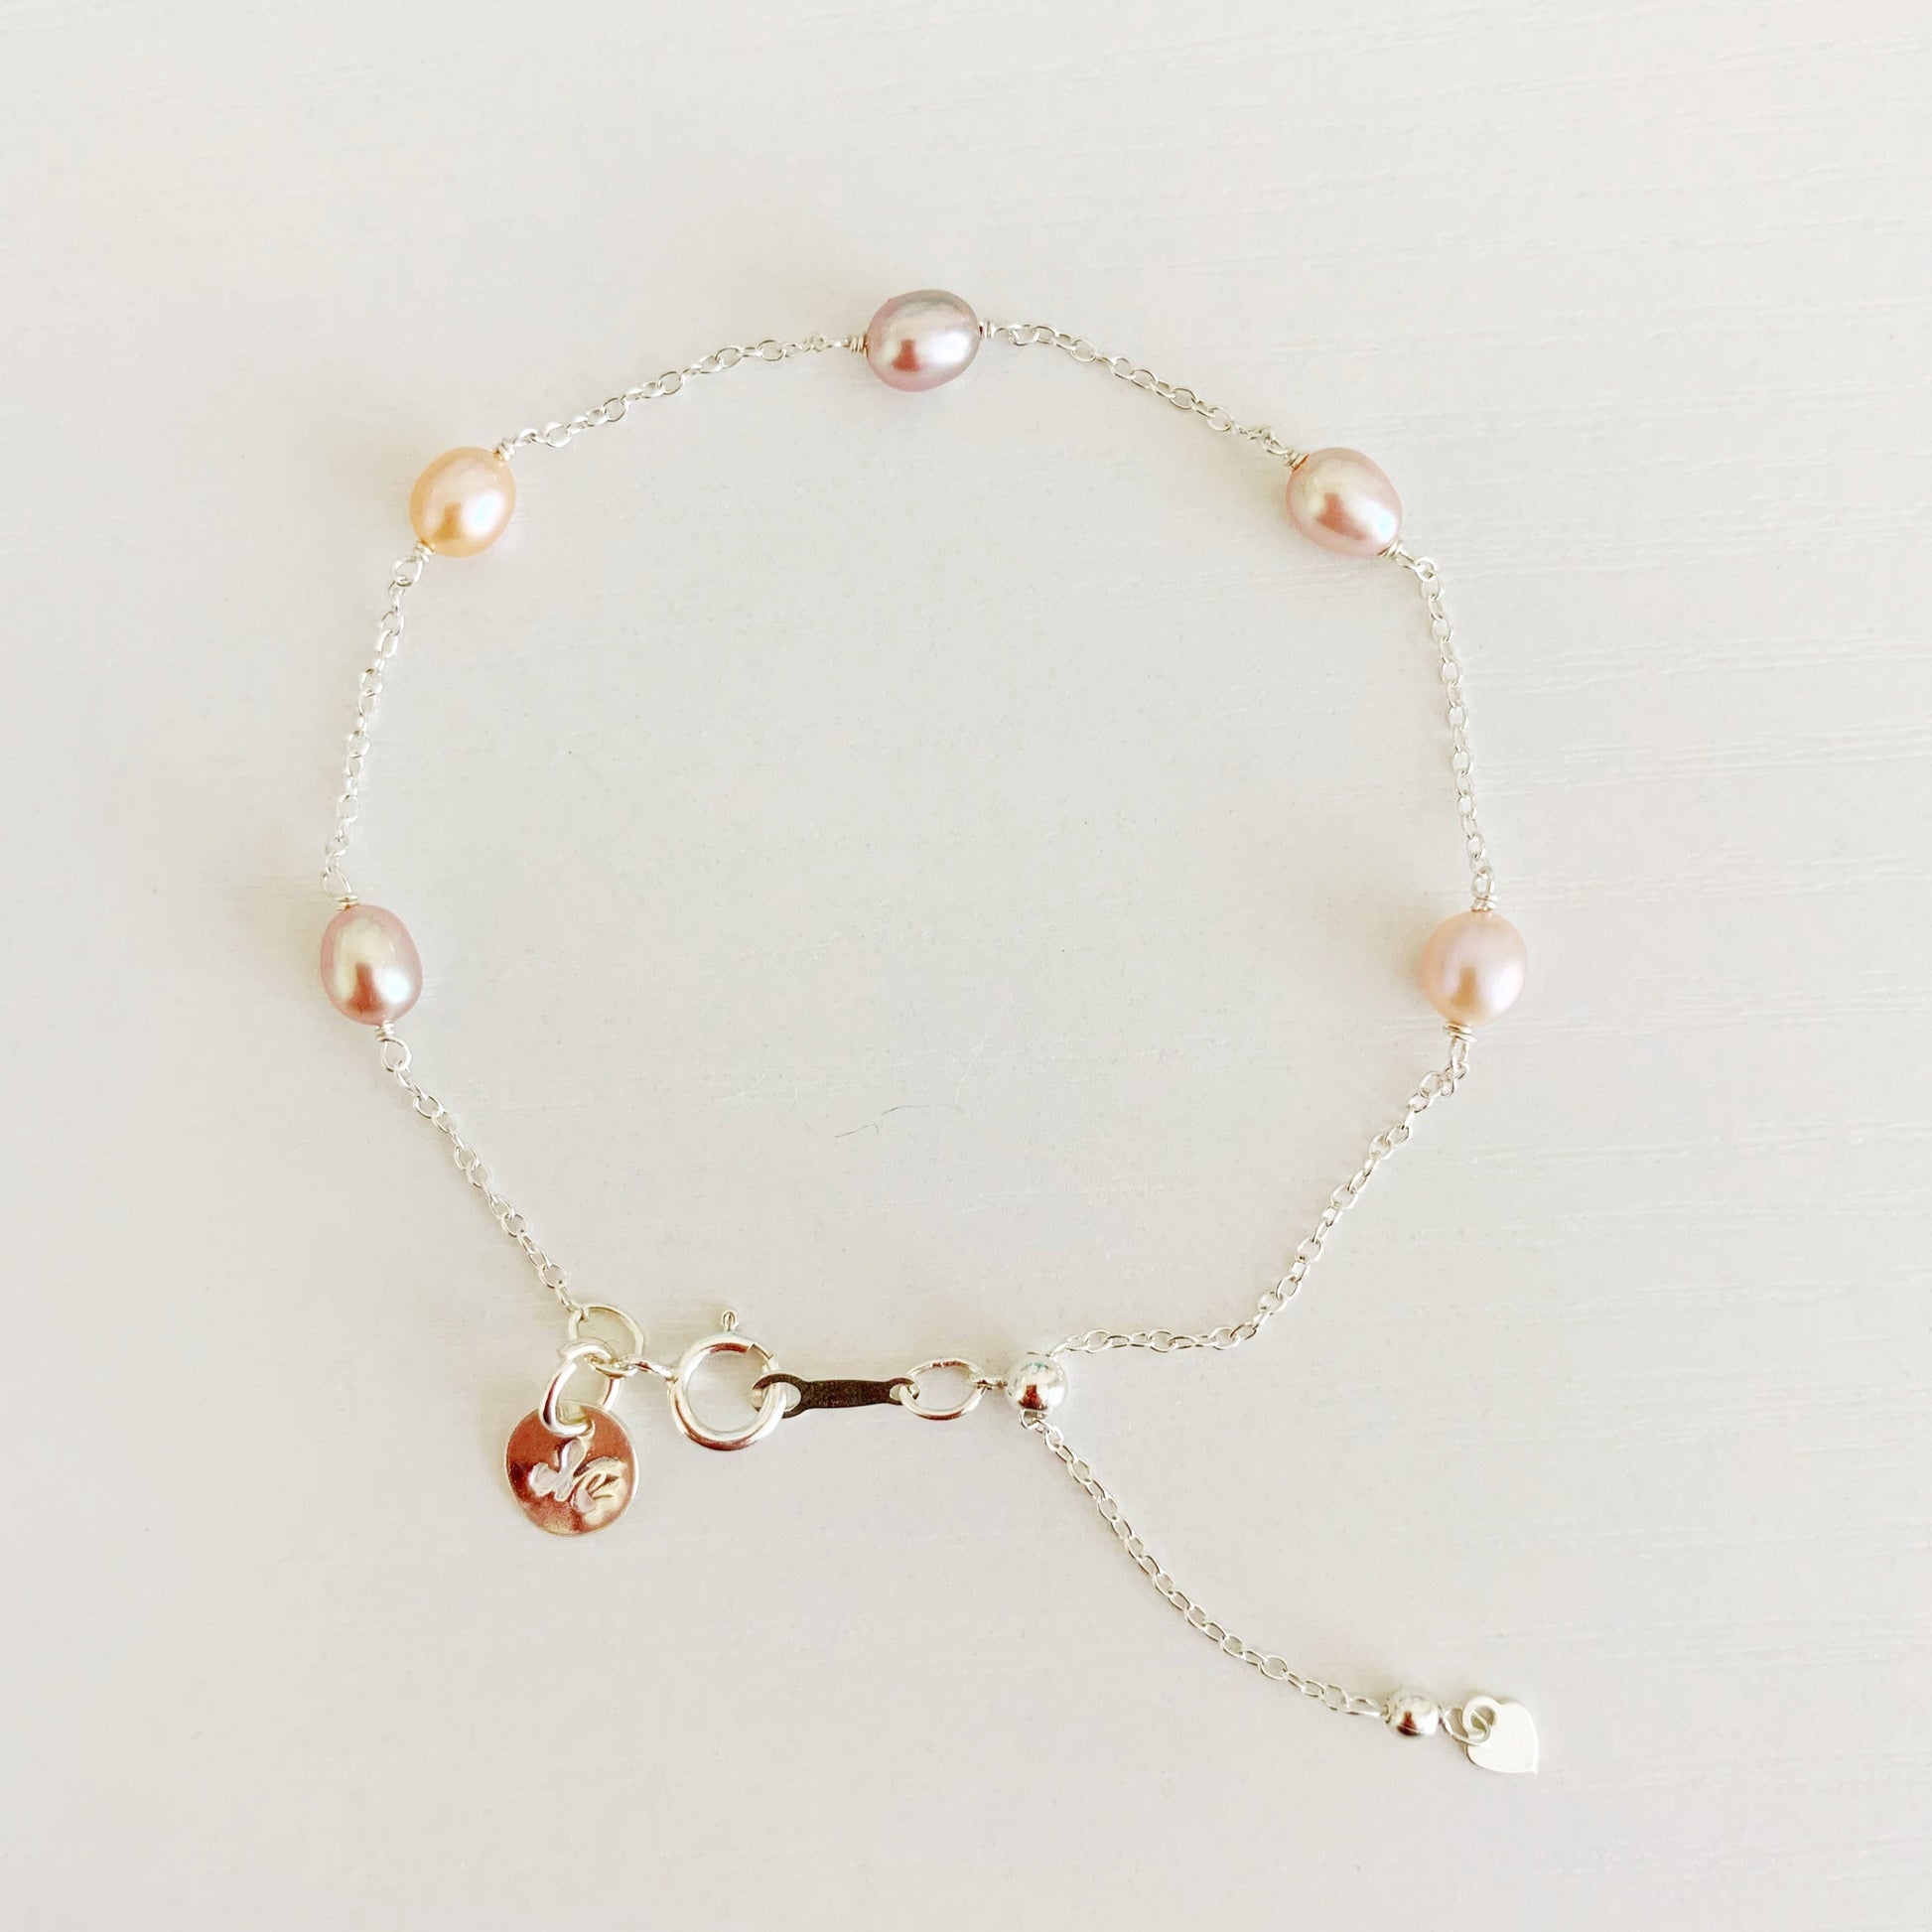 Block Island bracelet by mermaids and madeleines features natural pink color freshwater pearls in stations on a sterling silver chain bracelet. theres a slide bead near the clasp to adjust length. this bracelet is photographed in full view on a white surface